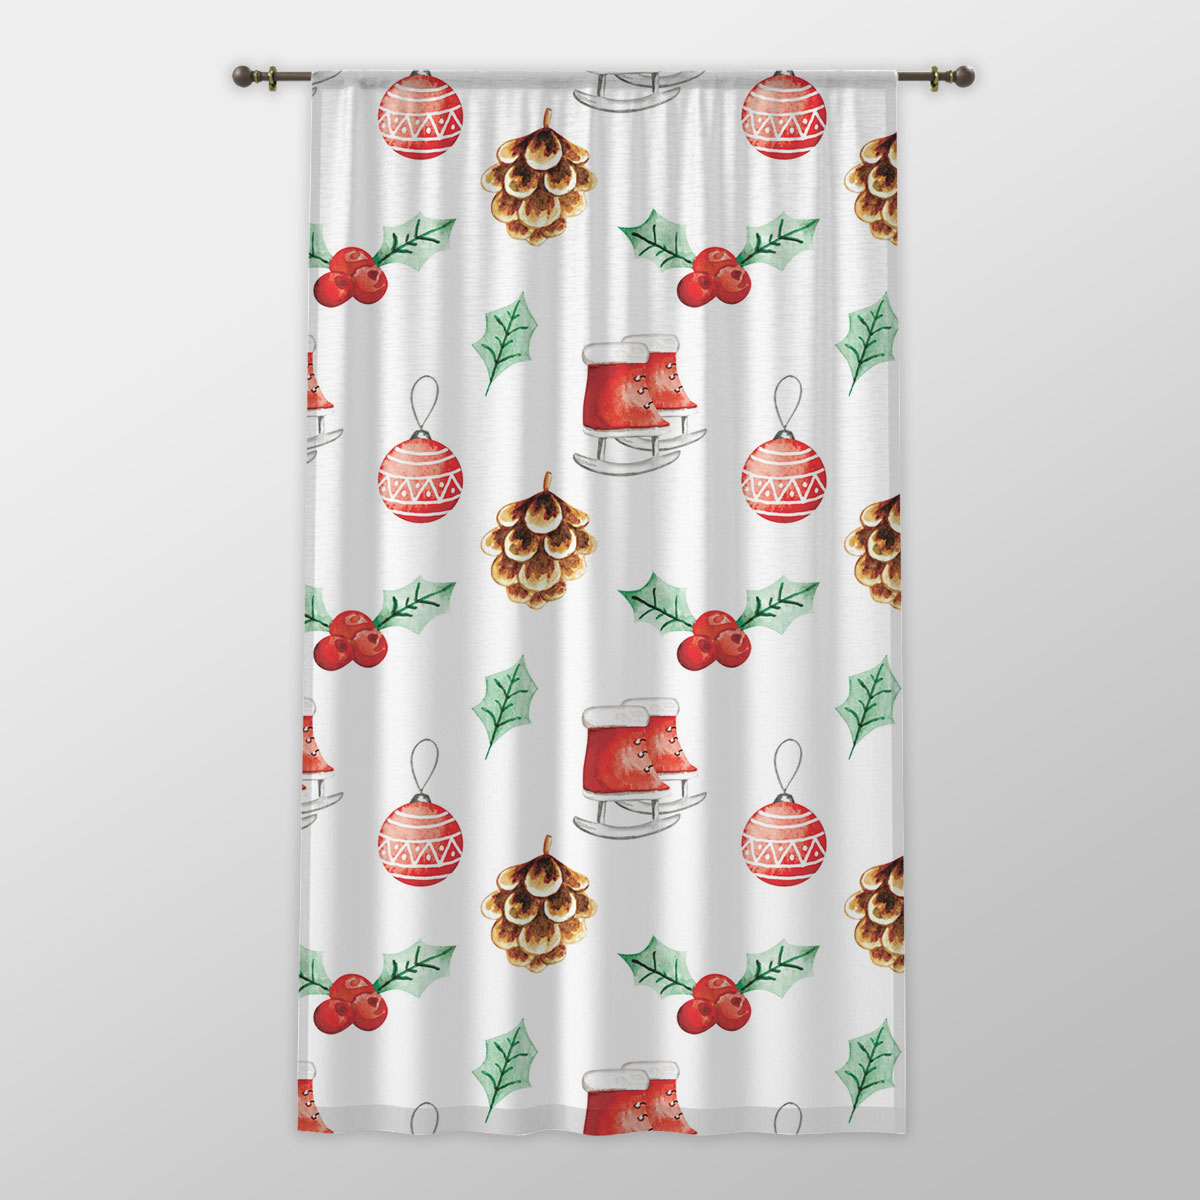 Ice Skates, Holly Leaf, Pine Cone And Christmas Baubles One-side Printed Window Curtain